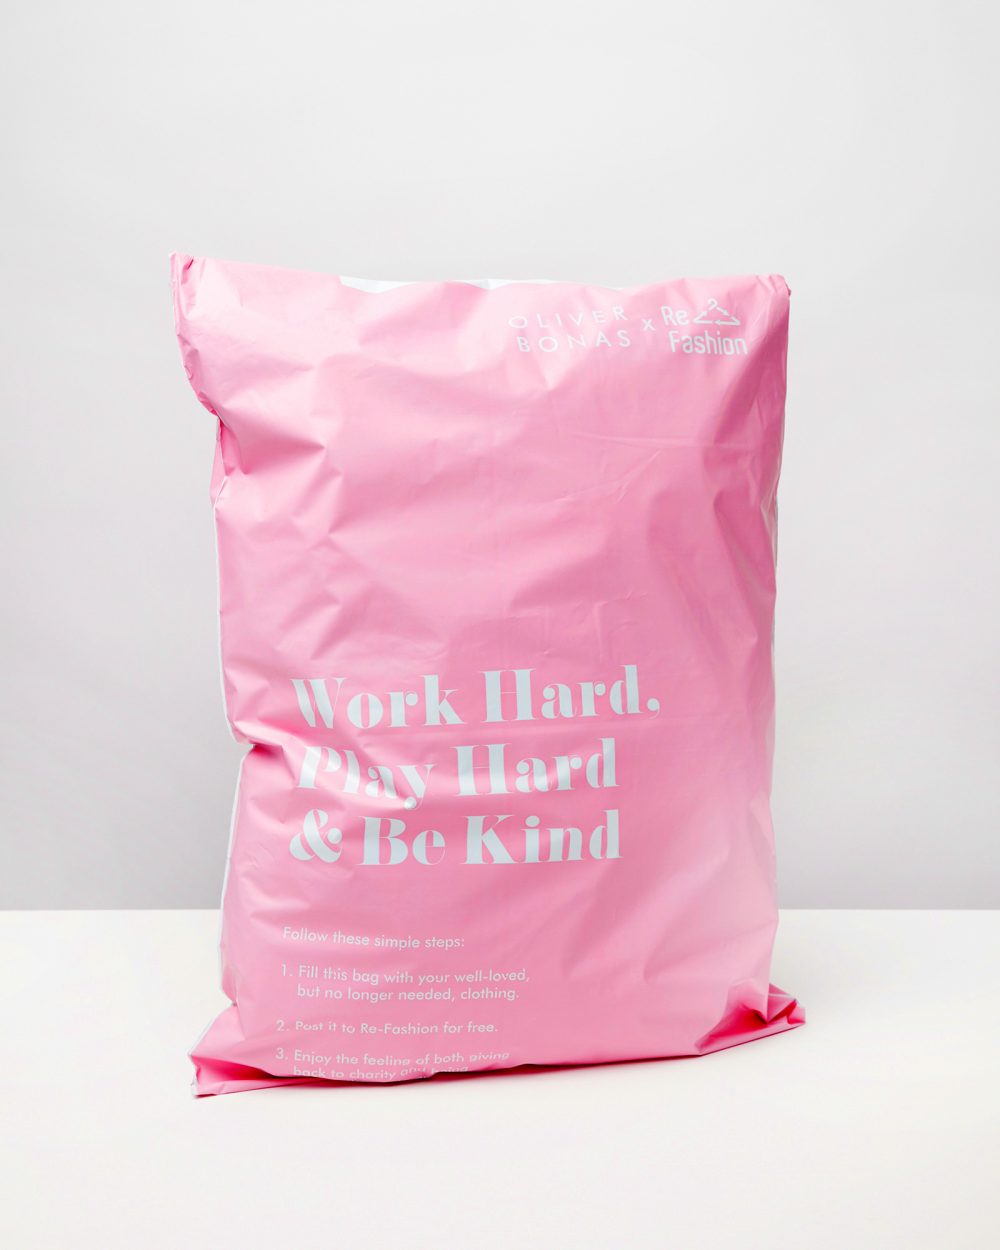 Re-Fashion Mailing Bags